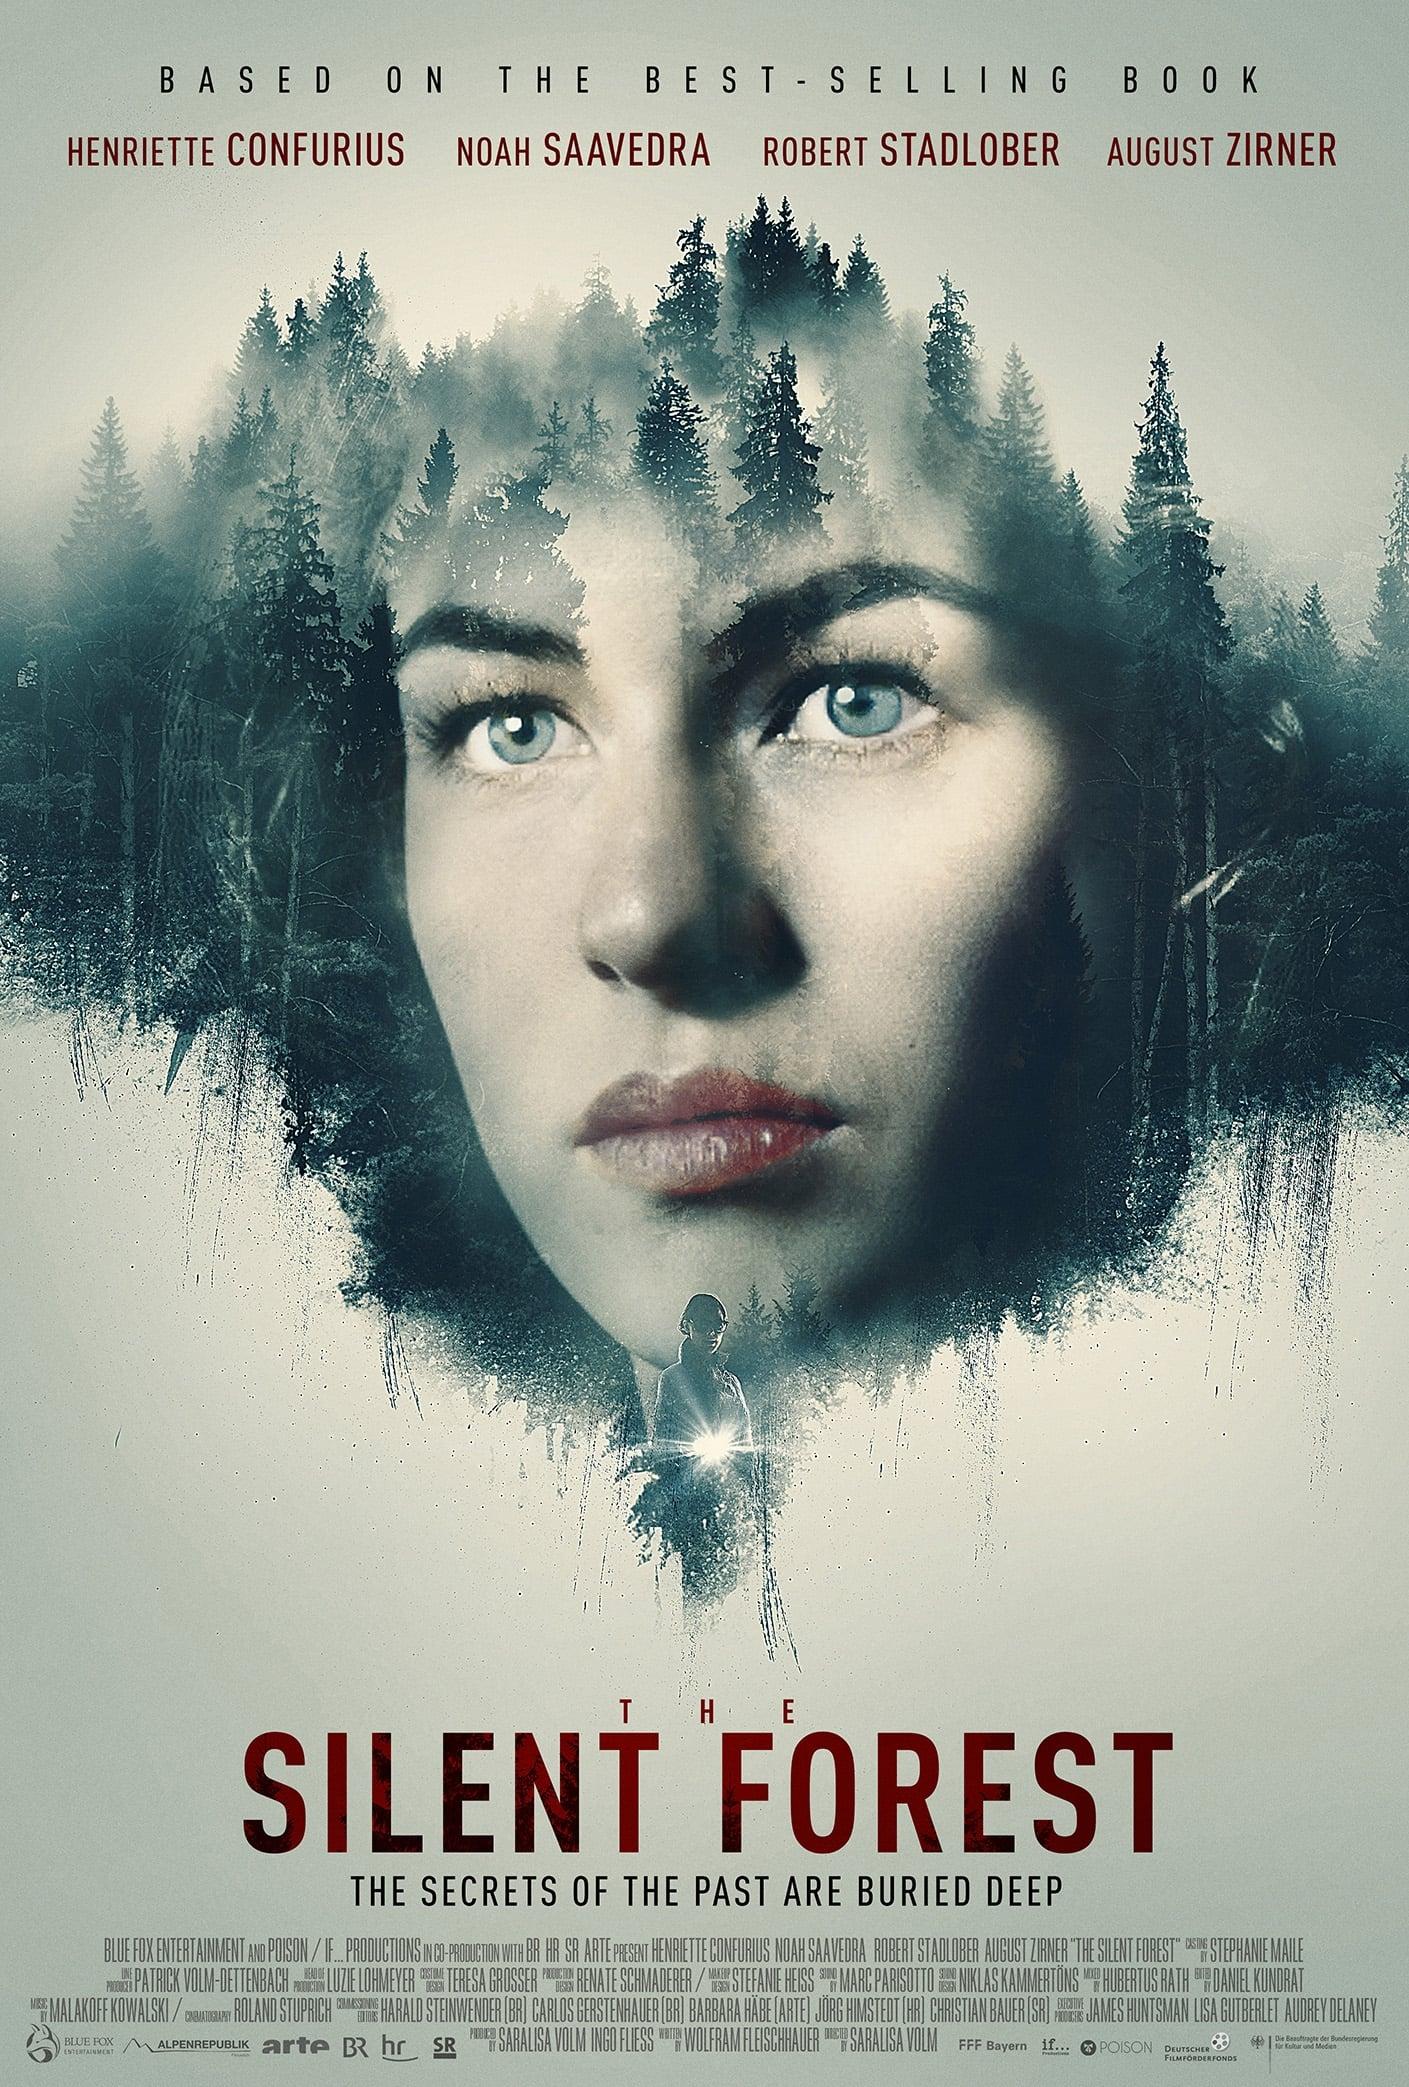 The Silent Forest poster